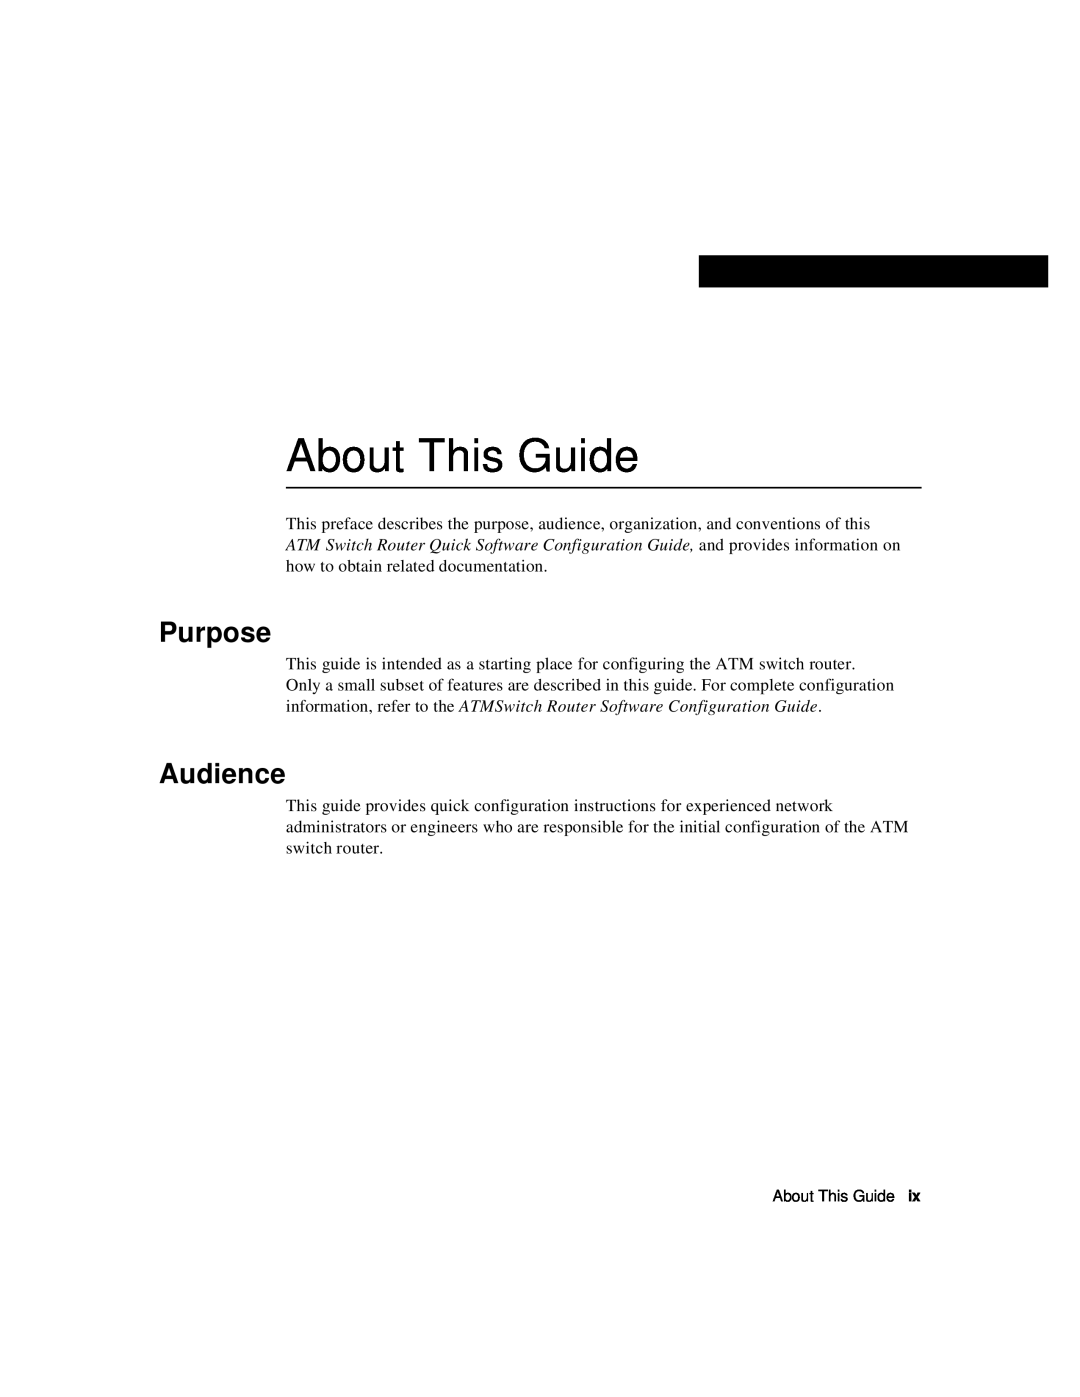 Cisco Systems 78-6897-01 manual About This Guide, Purpose, Audience 